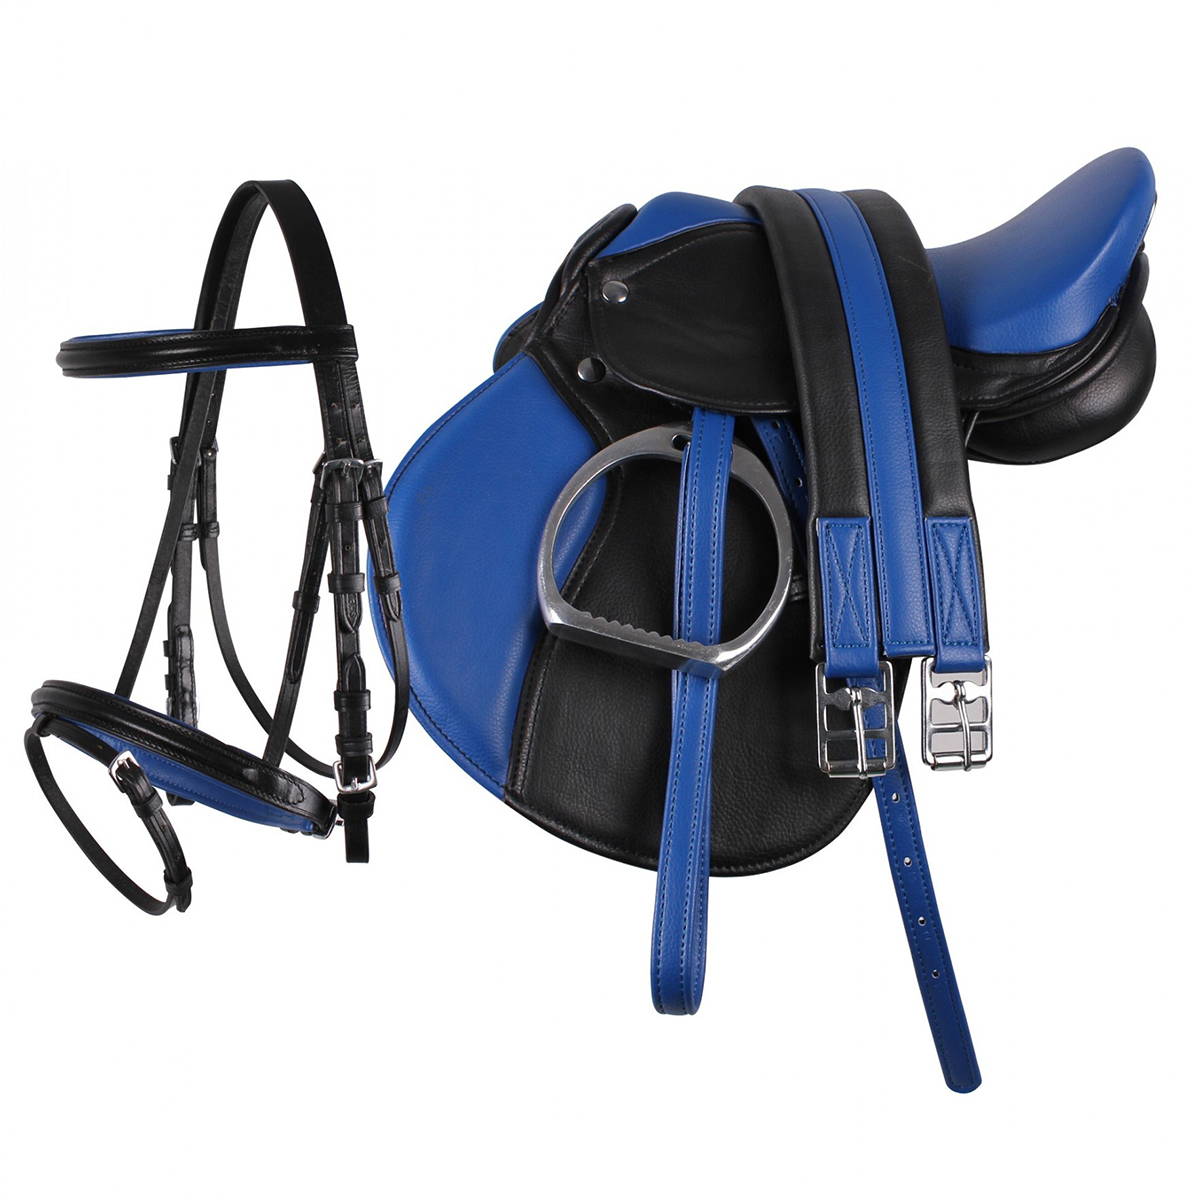 Complete Zadelset Qhp, 13 inch?in blauw